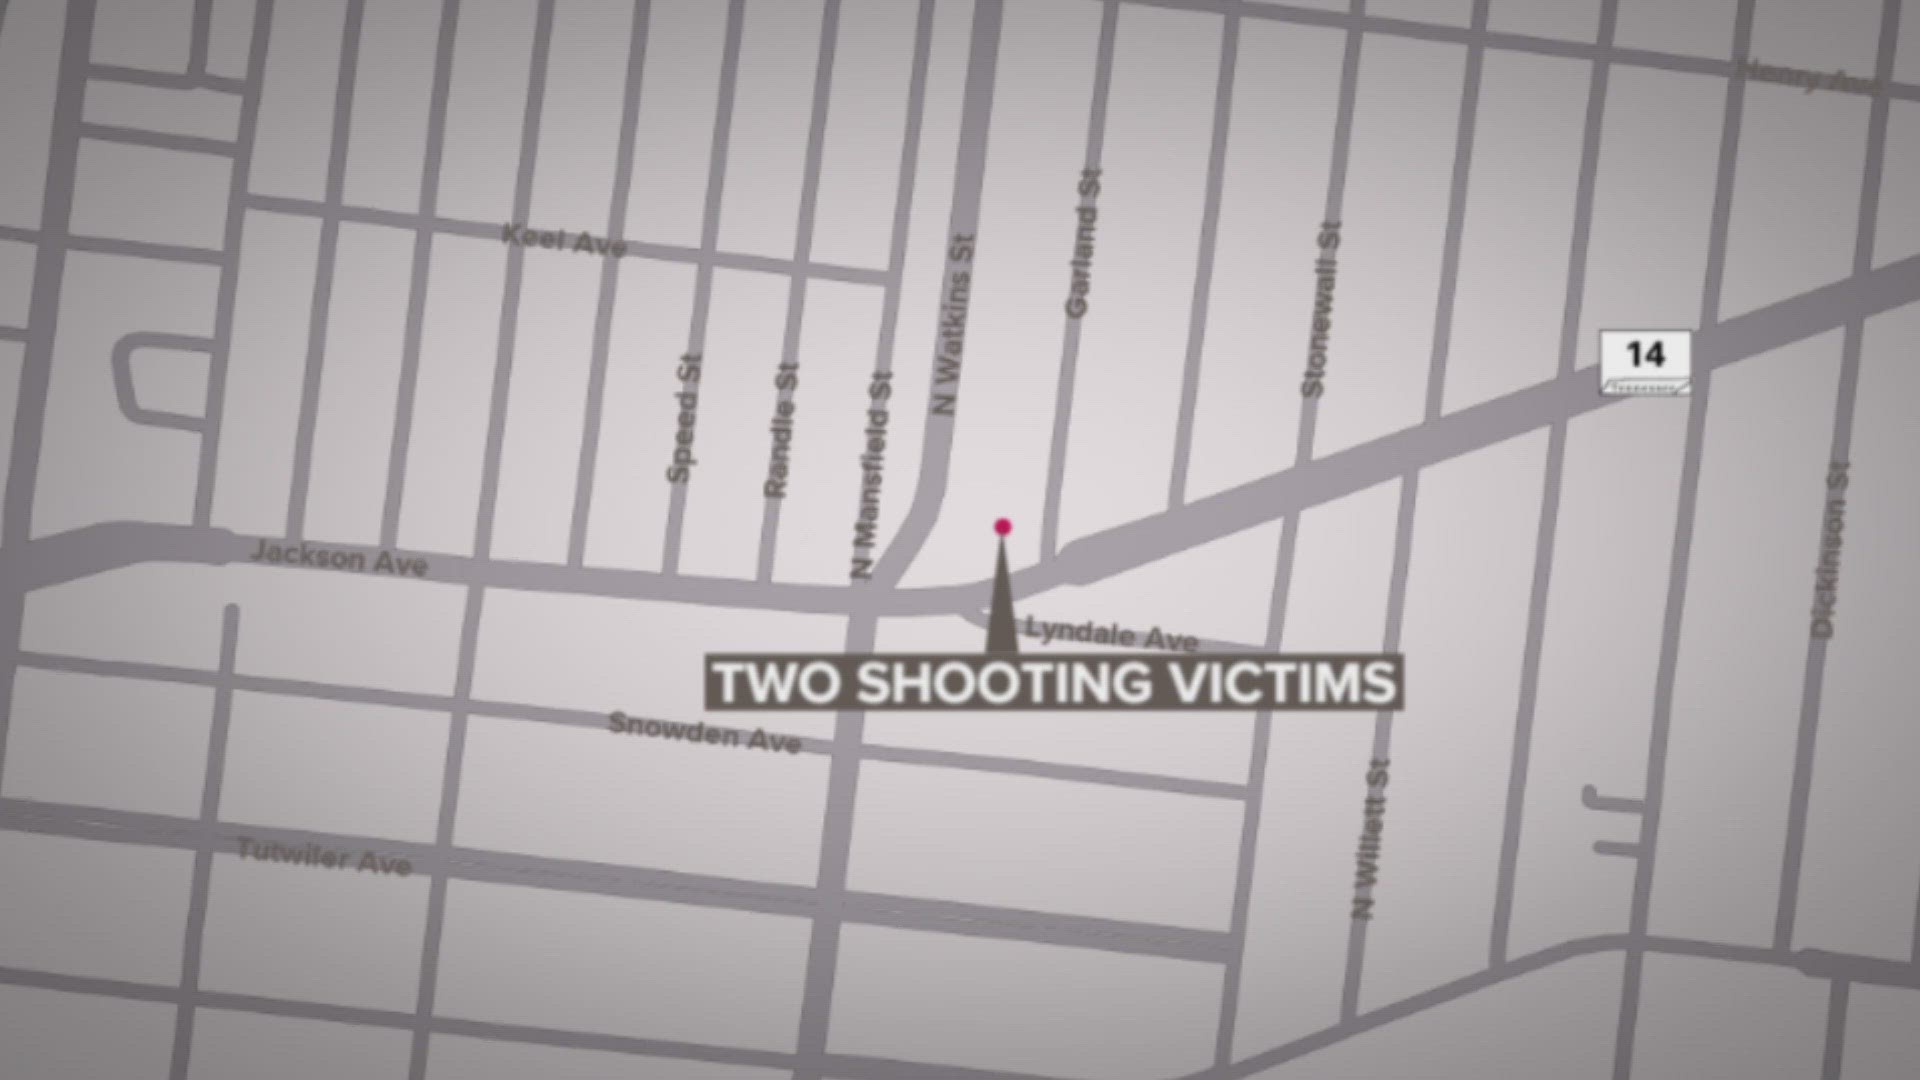 Officers said they responded to a shooting Wednesday night on Sept. 27 in the 1400 block of Jackson Avenue.